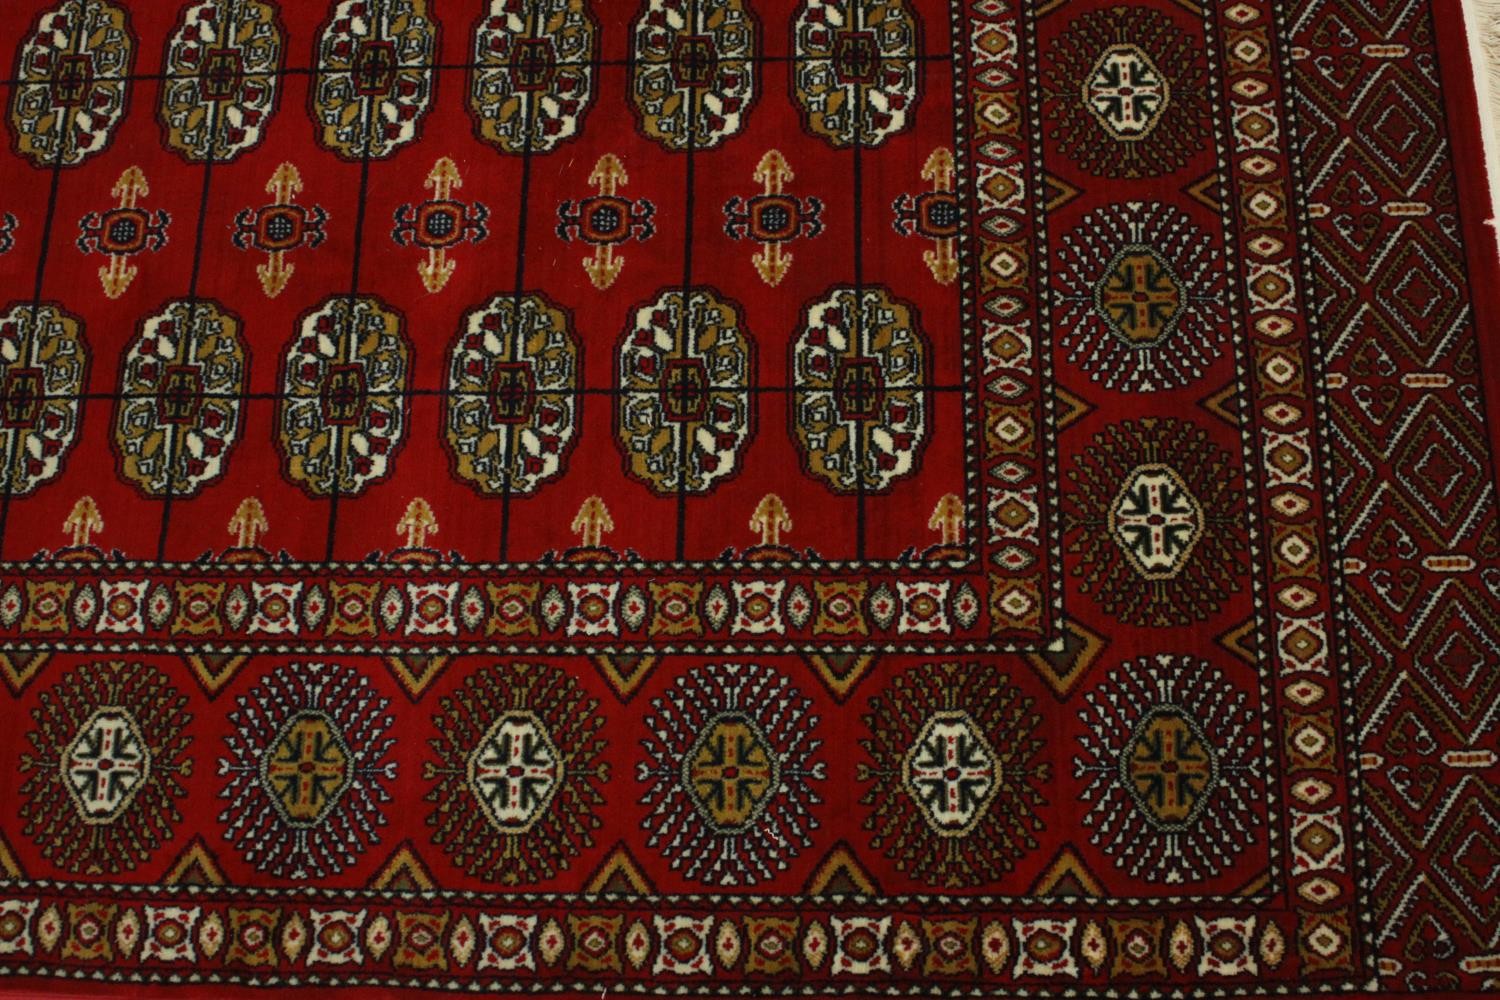 A Bokhara carpet with elephant's foot motifs on a burgundy ground within floral multiple borders. - Image 5 of 8